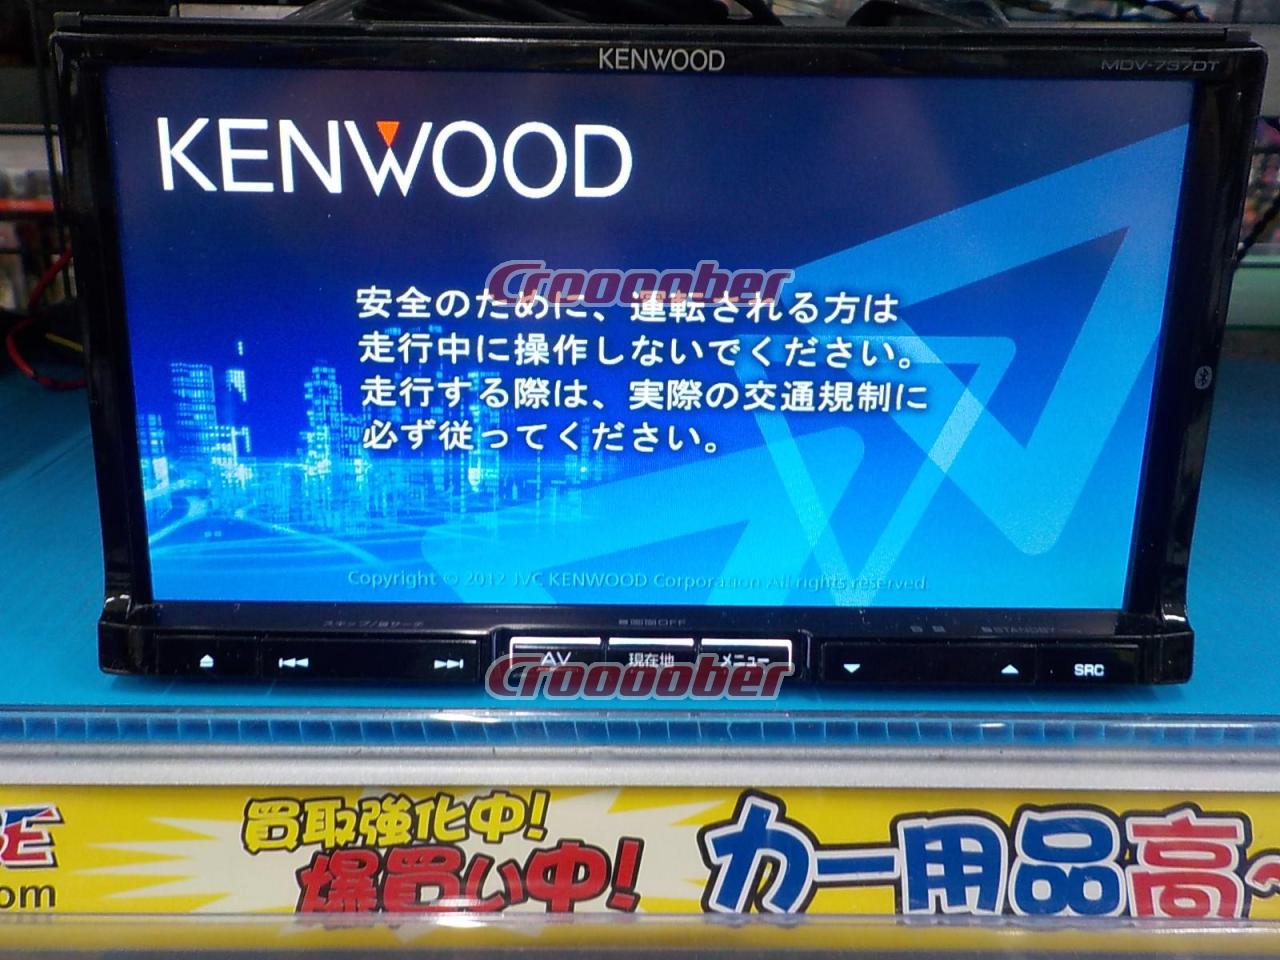 KENWOOD MDV-737DT Built-in Bluetooth! USB Connection Possible 